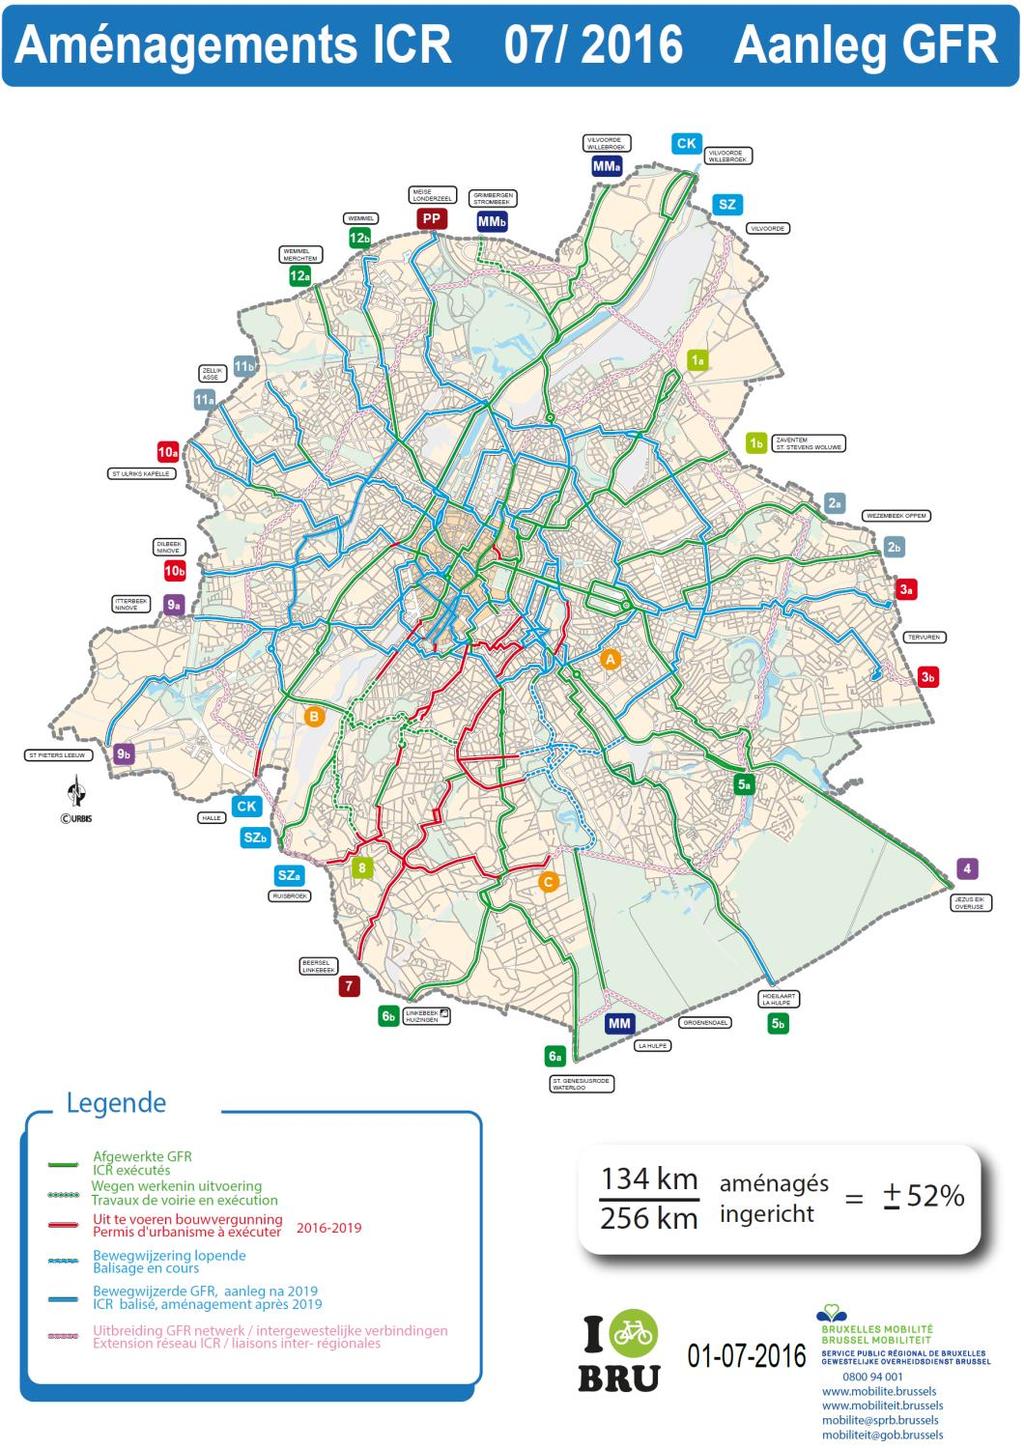 CURRENT STATE OF REGIONAL CYCLE ROUTES INBRUSSELS In the Brussels-Capital Region, the creation of cycle RER routes raises the question of coordination with regional cycle route projects.